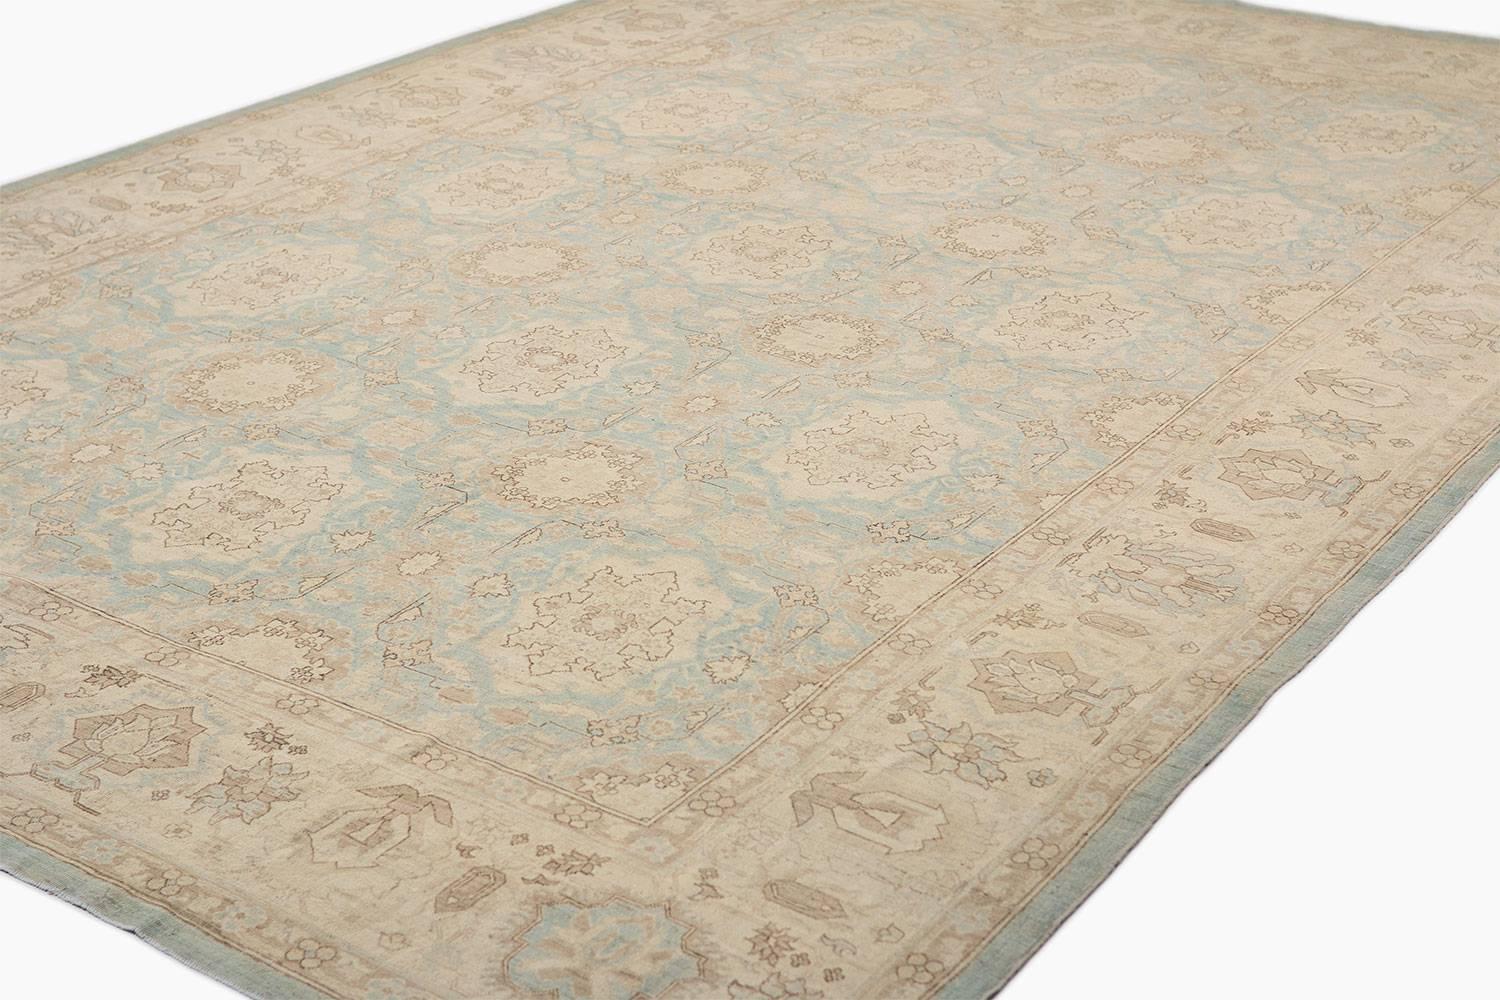 This carpet is handwoven and artfully sheared down to create a dreamy pastel art rug. Measures: 9'8" x 13'10.

It's muted cream and light blue carpet has a traditional style and geometric and floral motif. Handwoven in Afghanistan, cotton